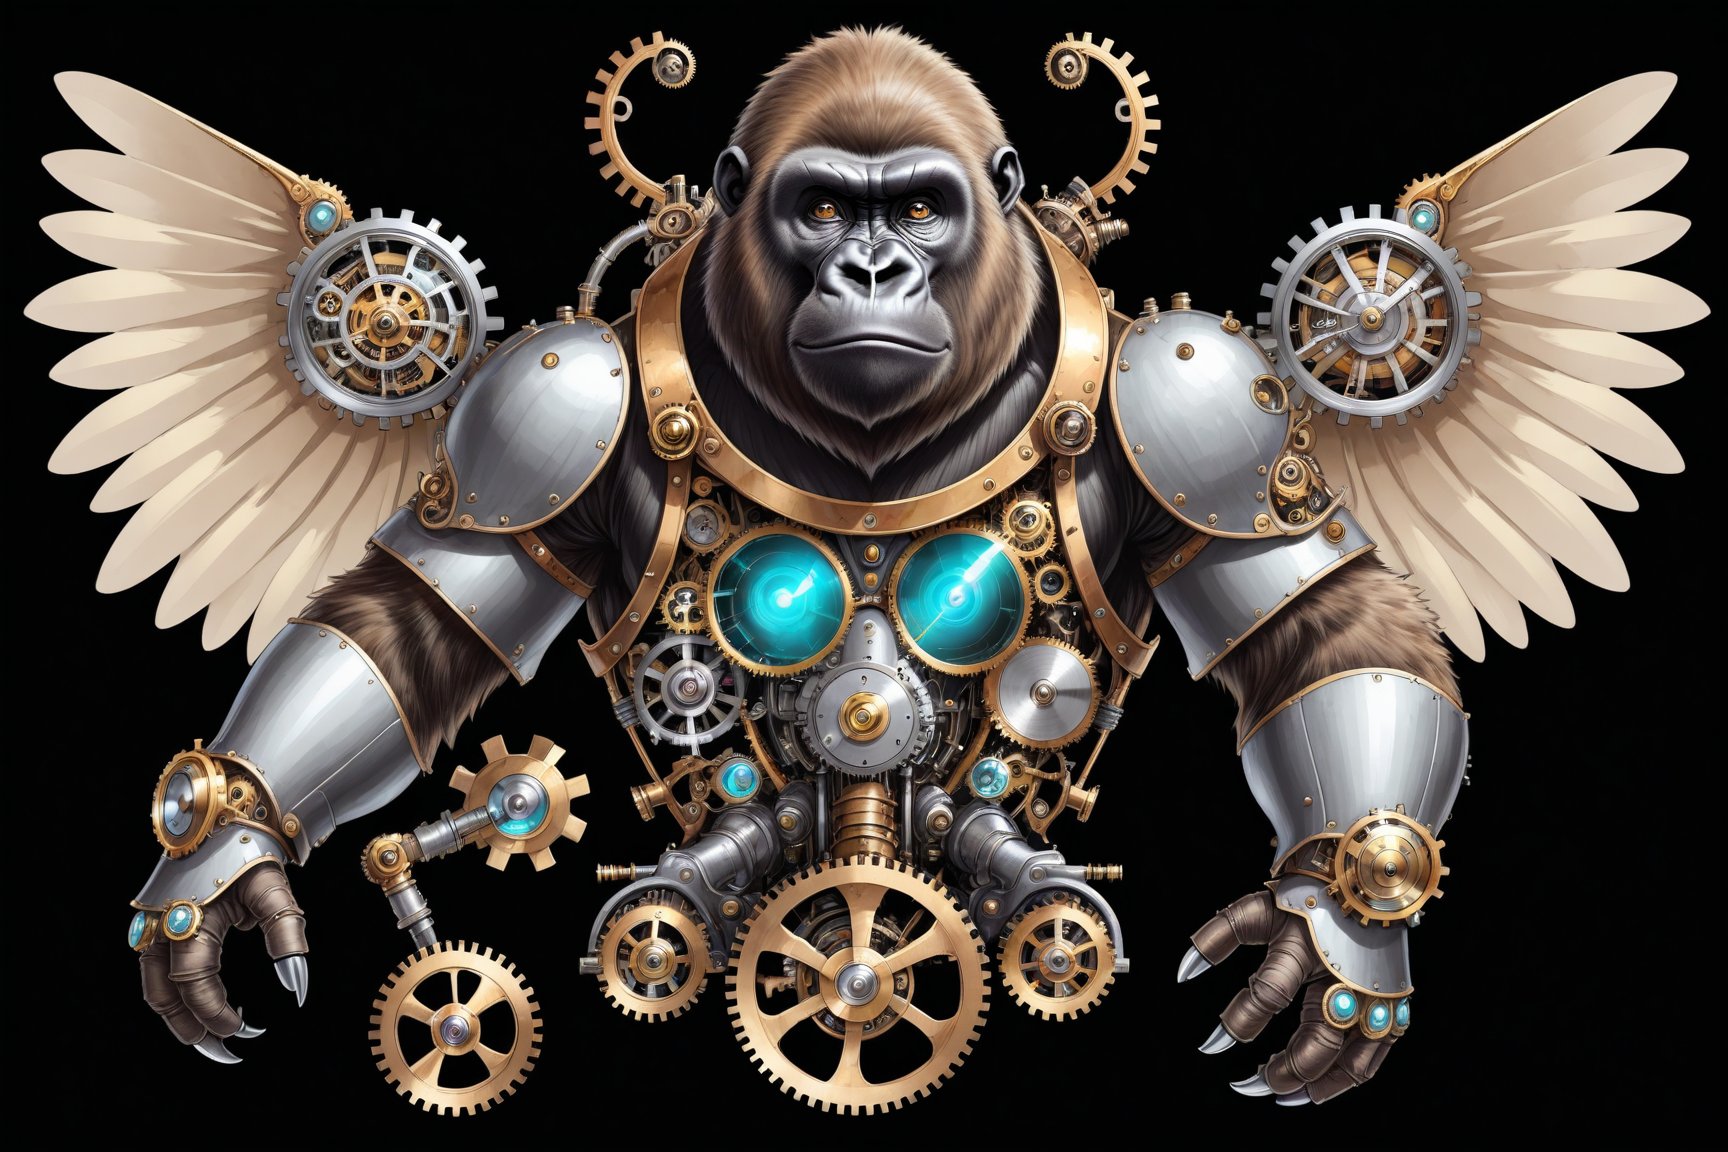 Generates a detailed steampunk style image with pastel colors and golden brown of a gorilla with wing seen from above. The beetle must be adorned with intricate gears and mechanical elements that imitate its natural structure. The image must be high resolution and show a perfect fusion between the organic and the mechanical, black background,DonMSt34mPXL,steampunk,steampunk style